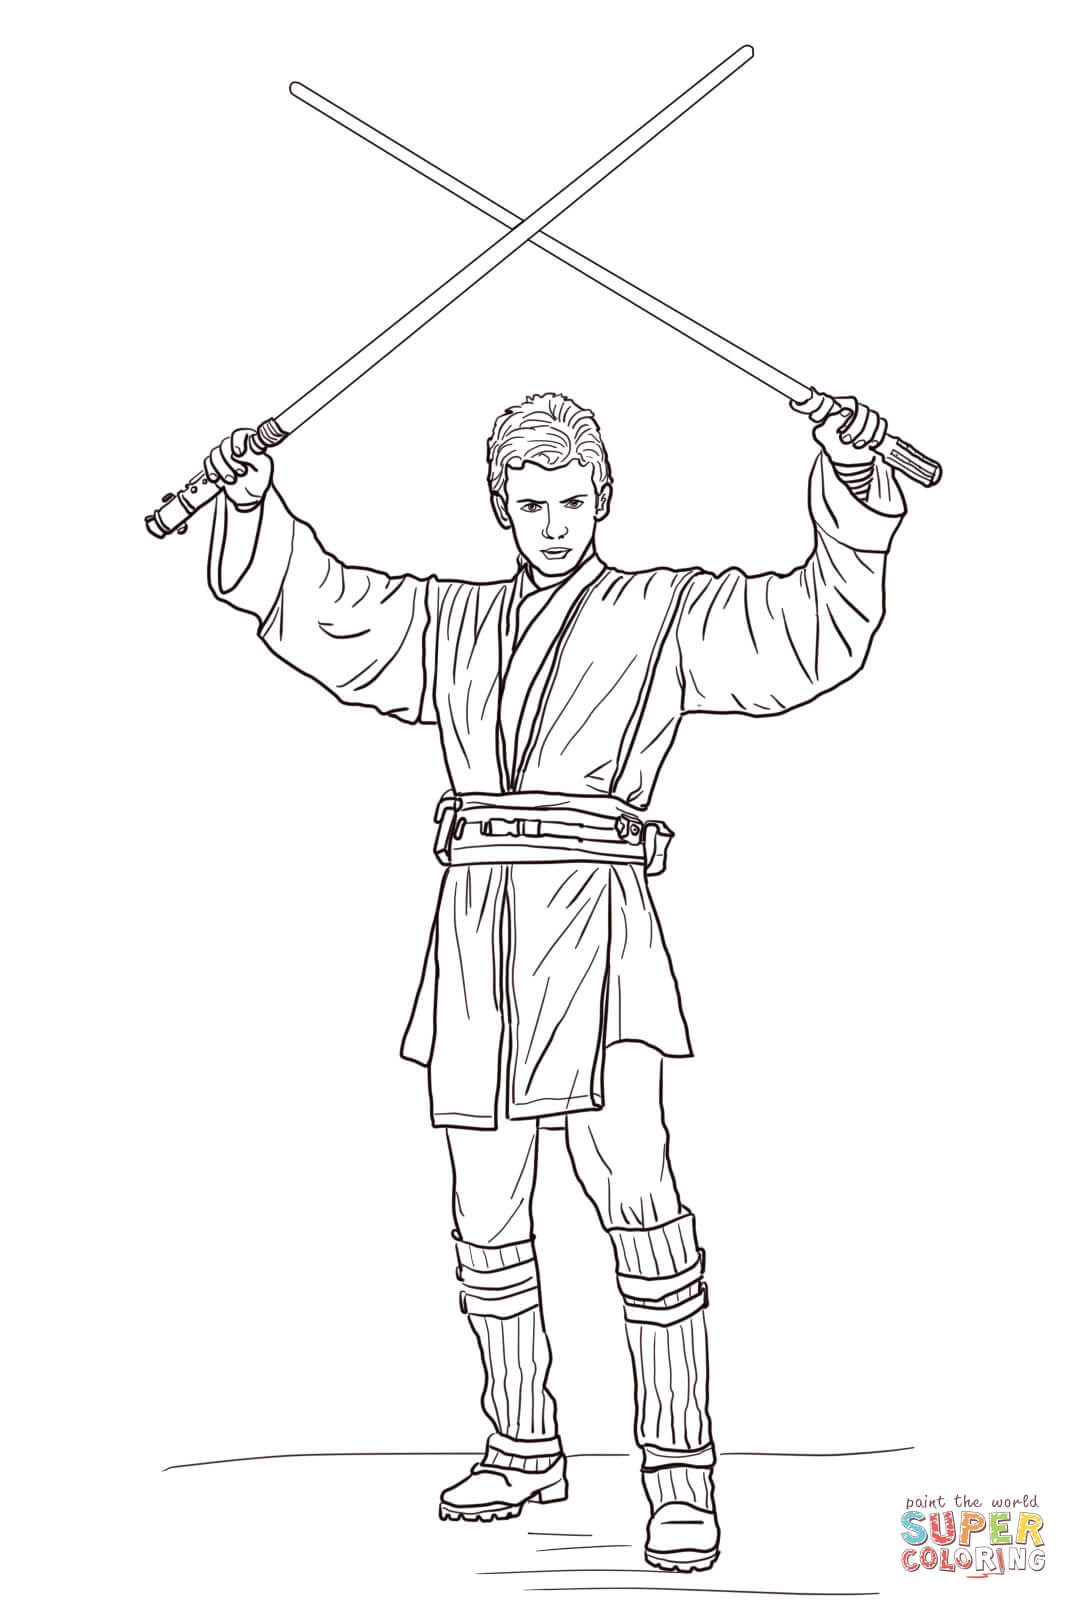 Anakin Skywalker with Two Lightsabers coloring page | Free ...